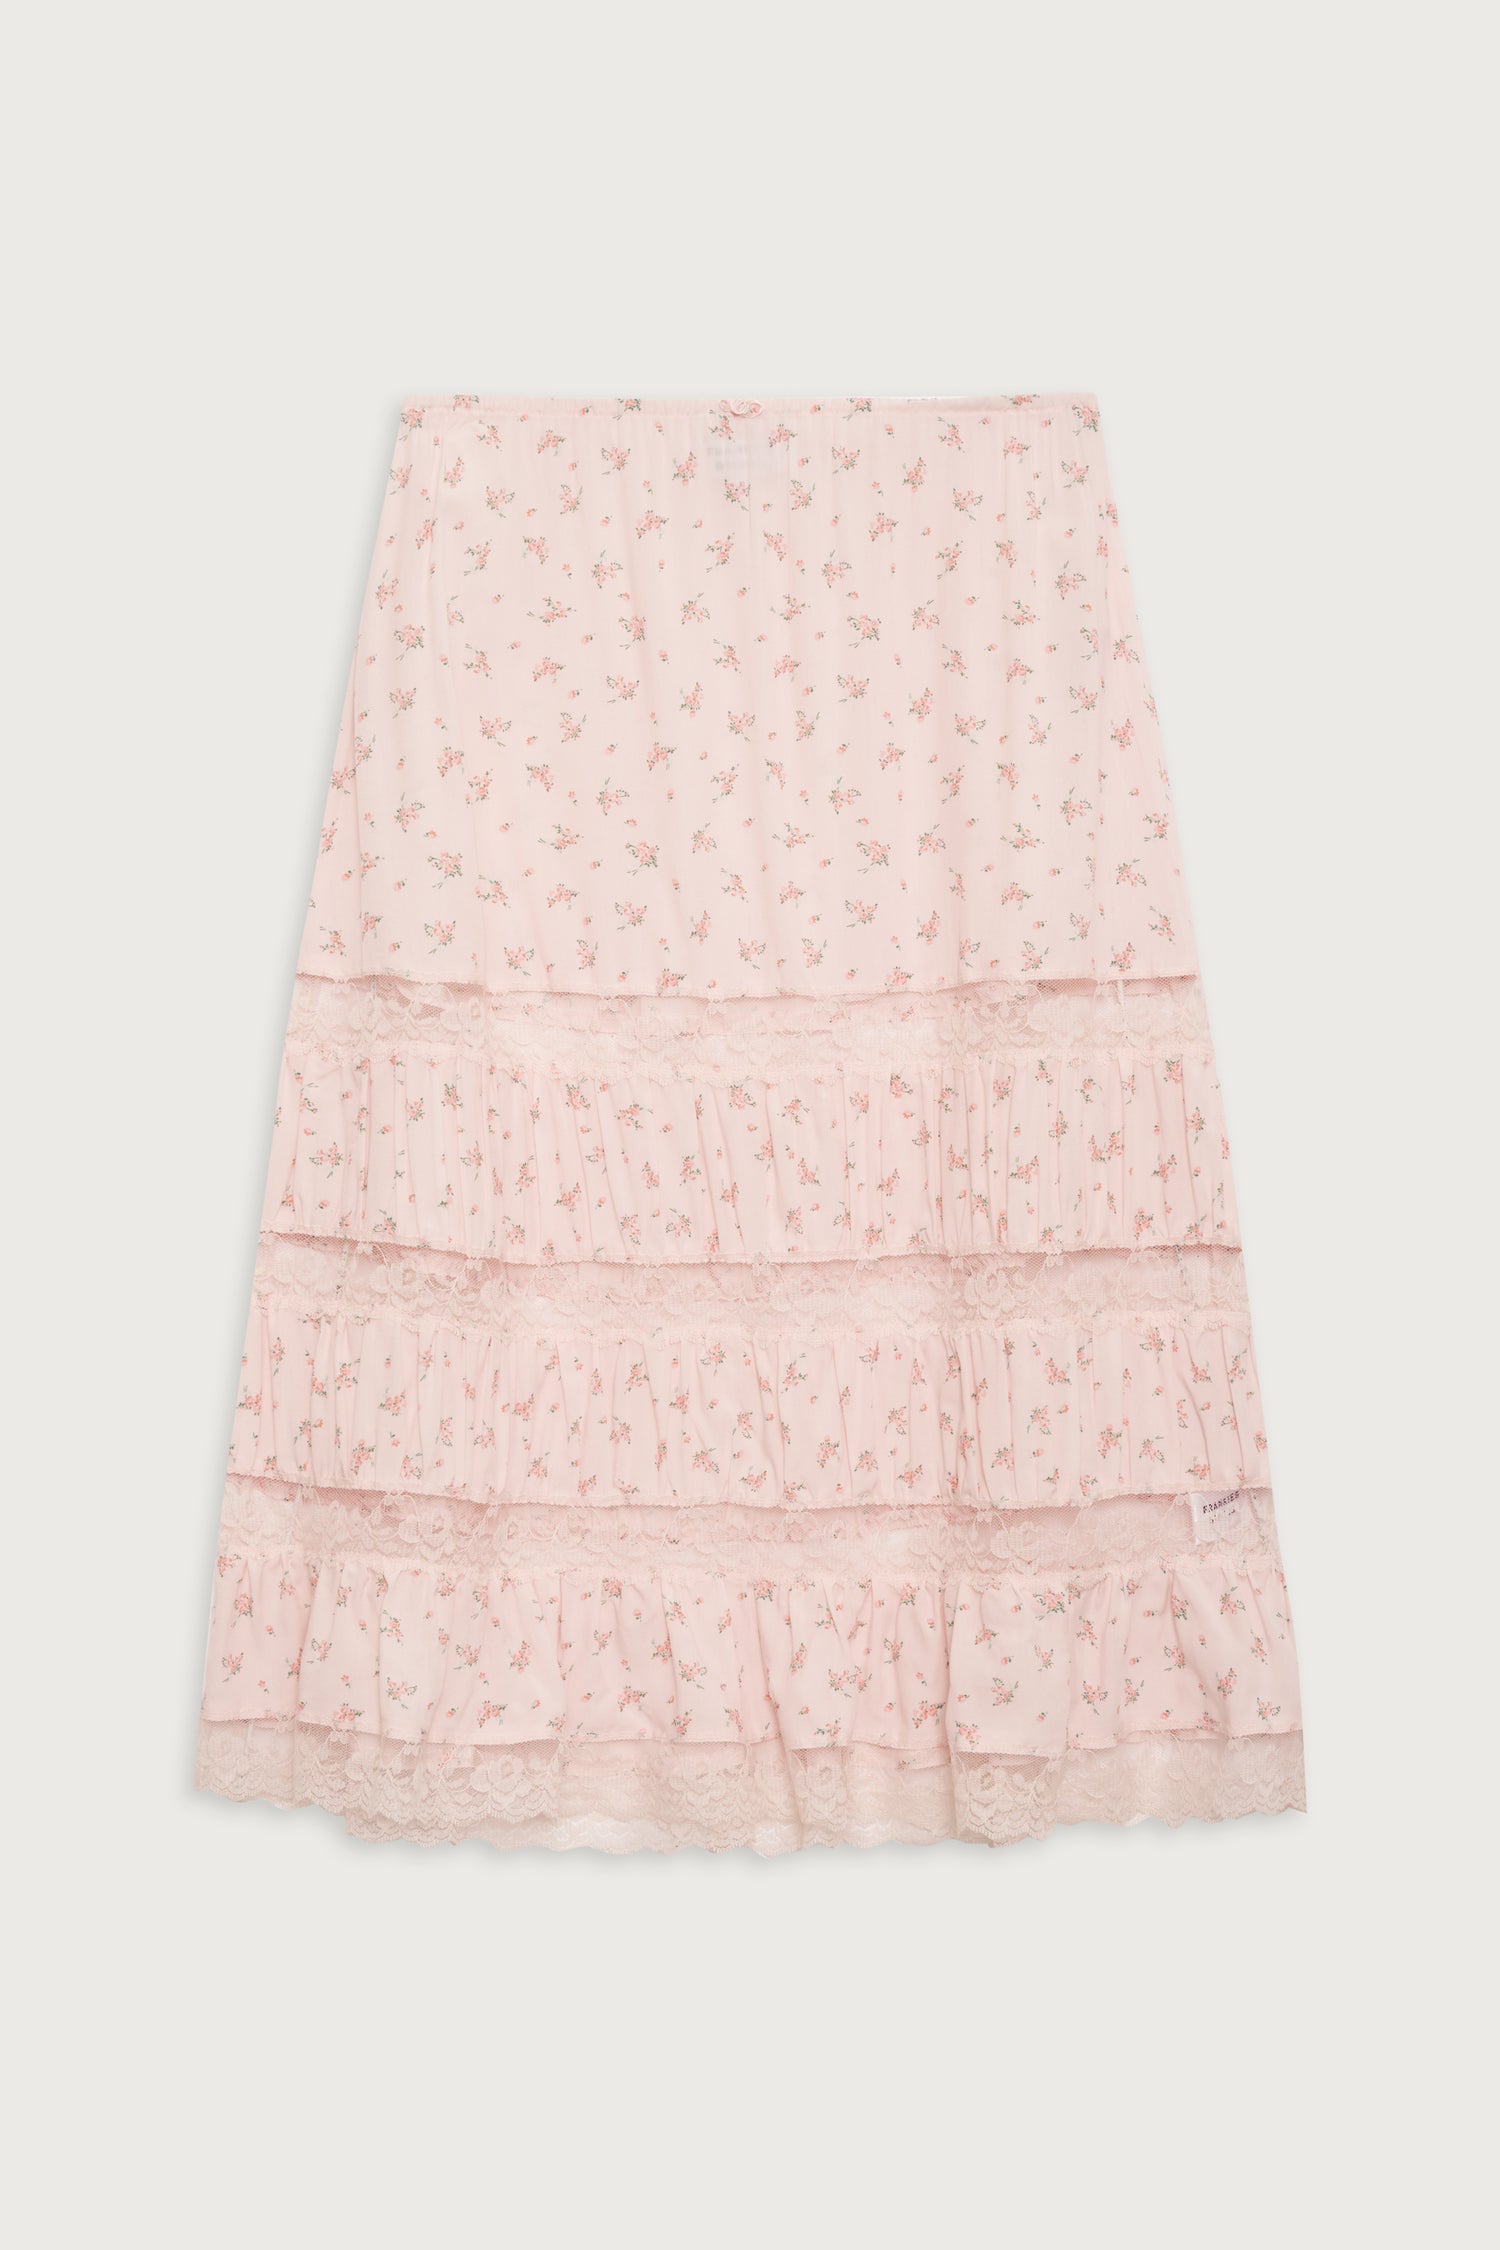 Solstice Floral Midi Skirt - Baby Bouquet Pink